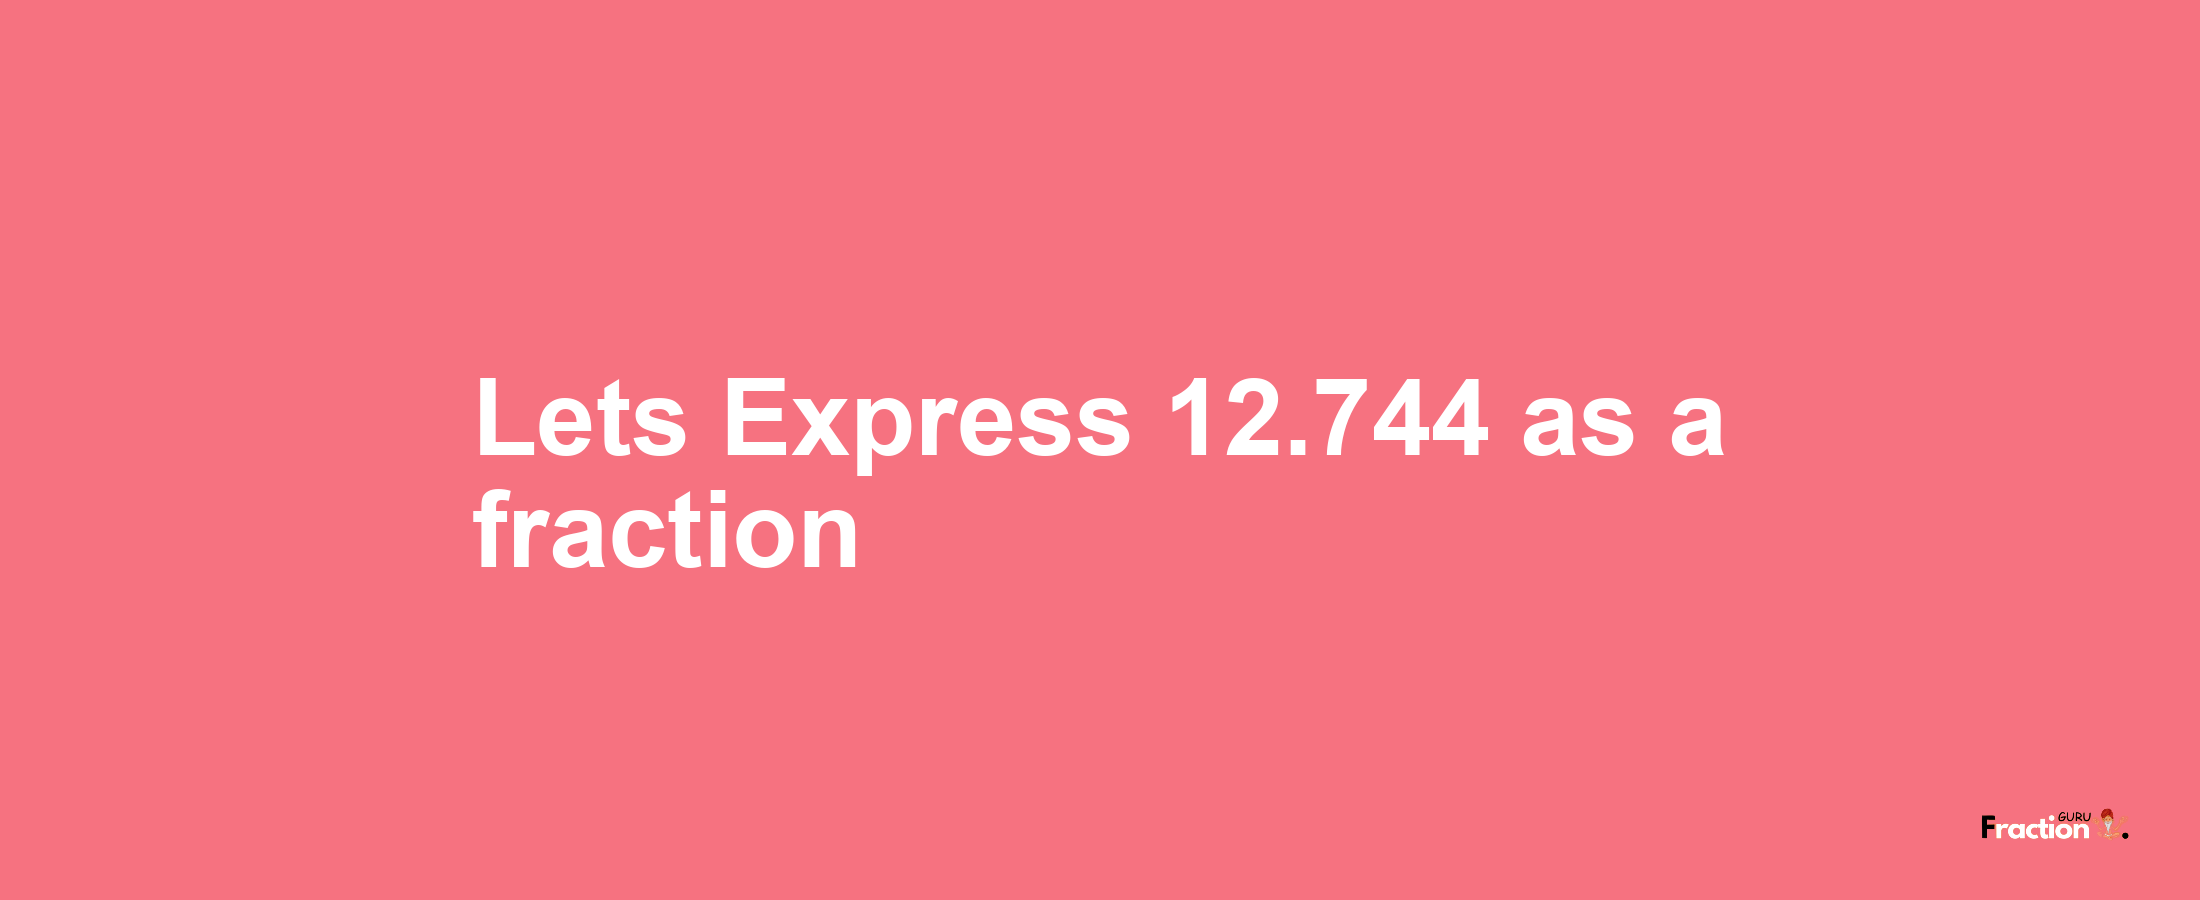 Lets Express 12.744 as afraction